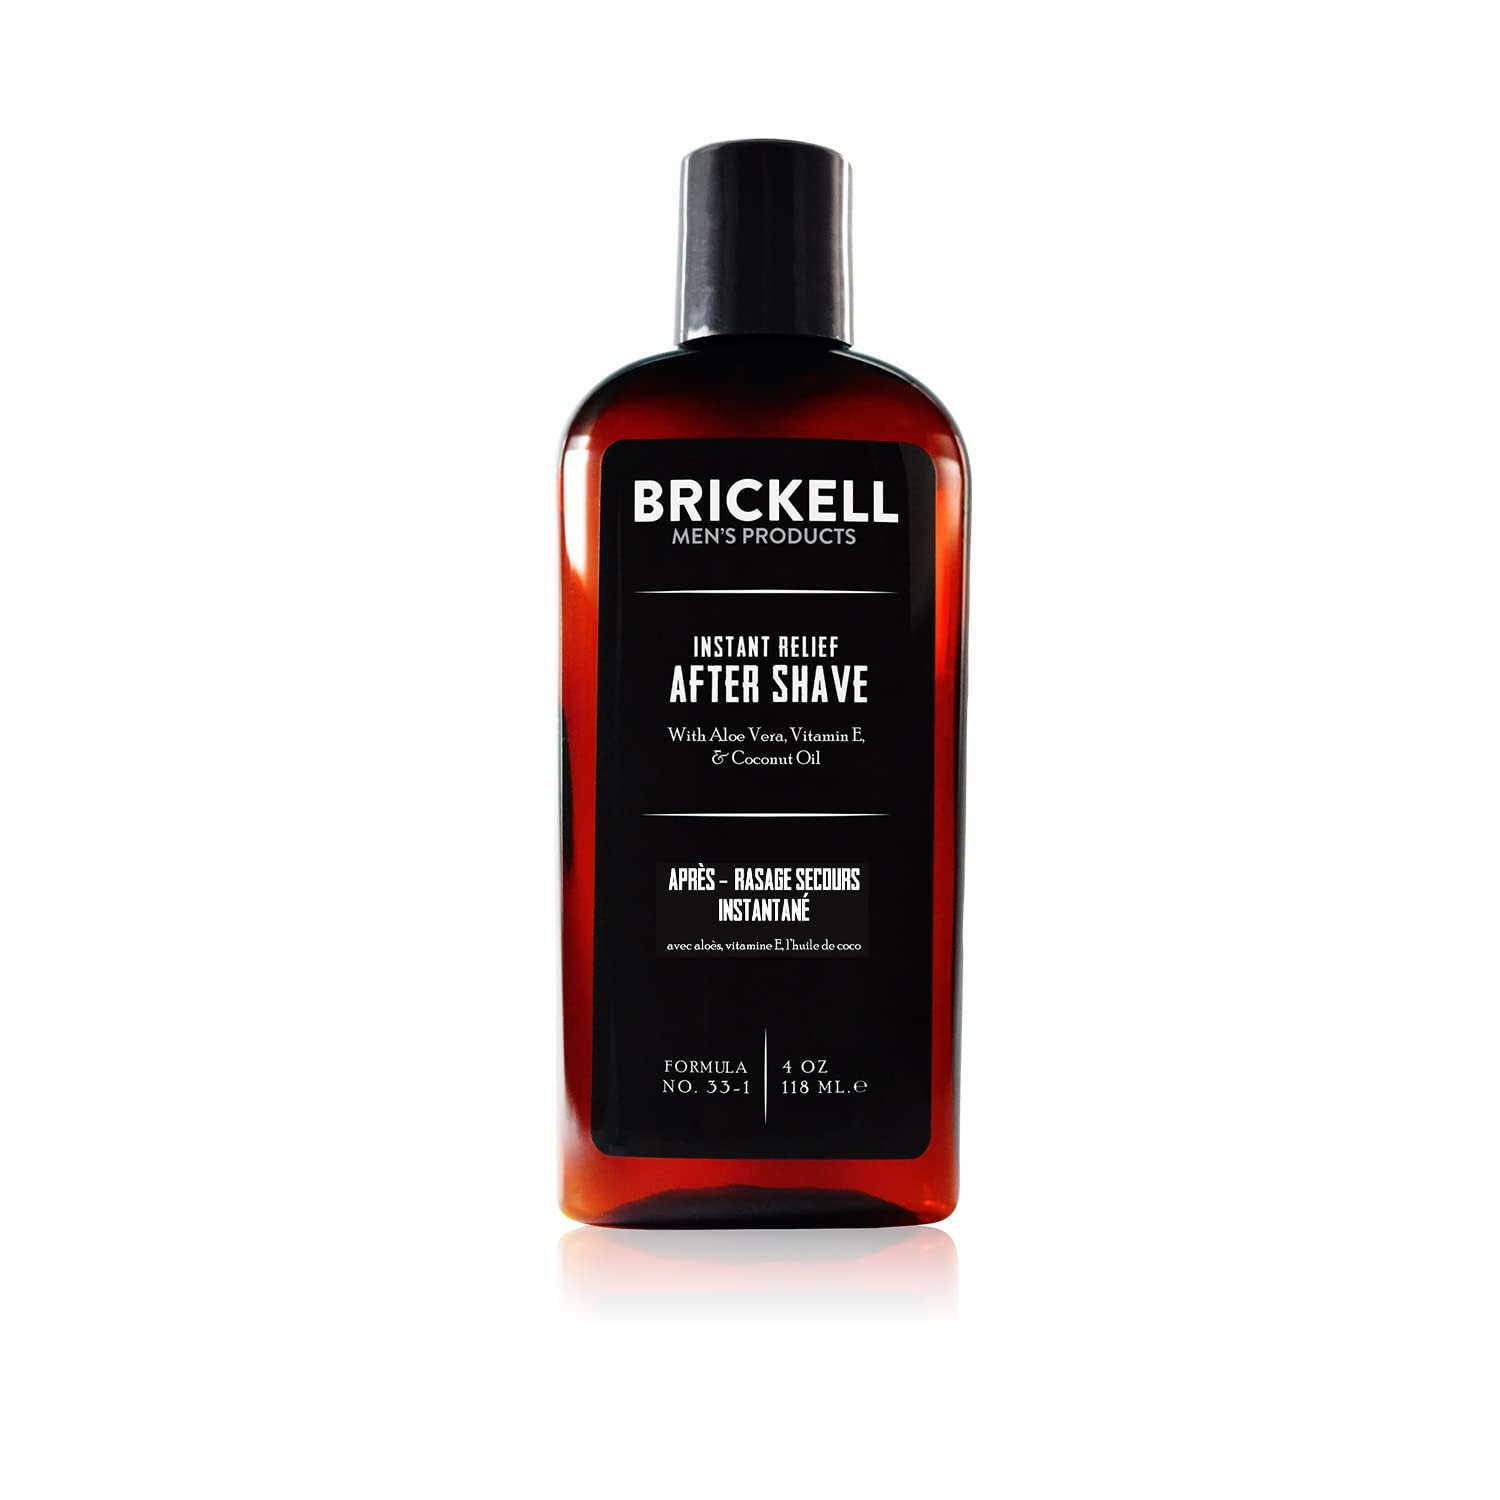 Brickell Mens Products Instant Relief Aftershave for Men, Natural and Organic Soothing After Shave Balm to Prevent Razor Burn, 4